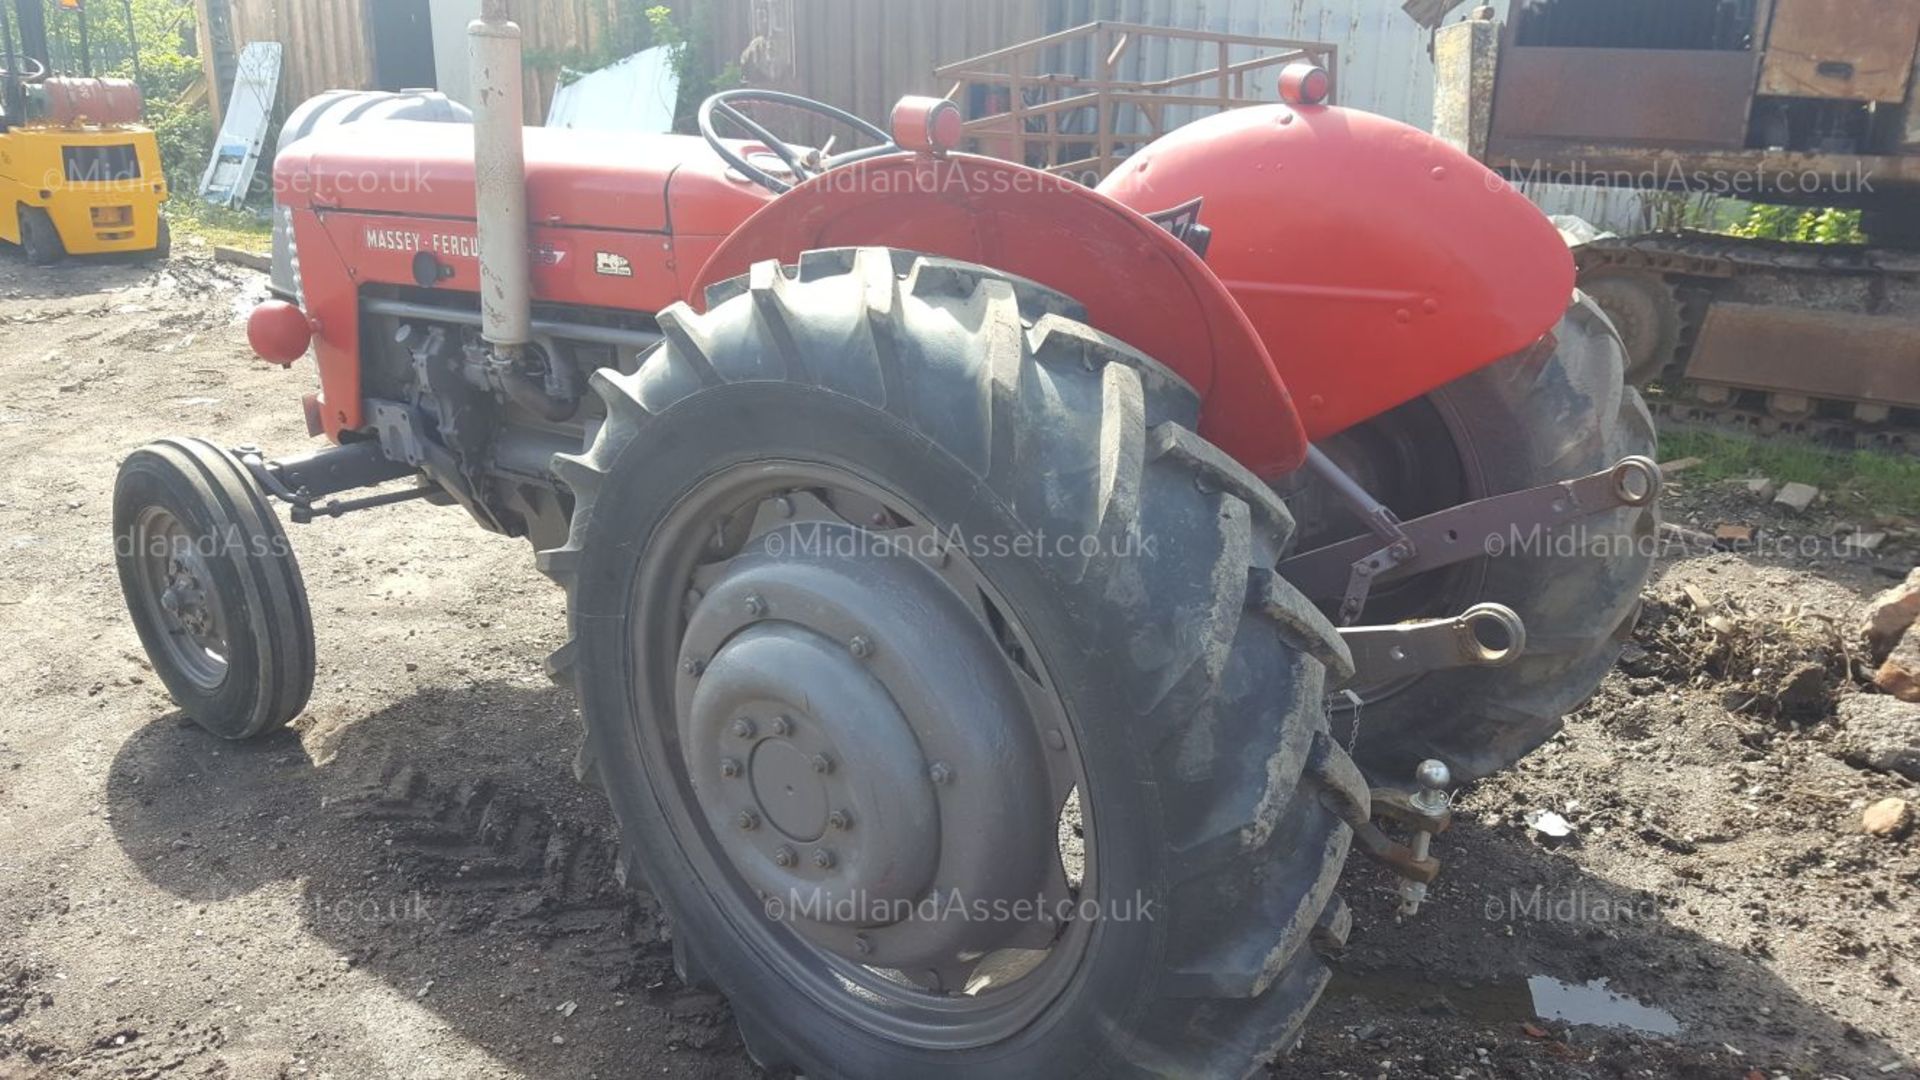 1959 MASSEY FERGUSON 65 DIESEL TRACTOR. STARTS, DRIVES AND PTO TURNS 2WD *NO VAT* - Image 5 of 10